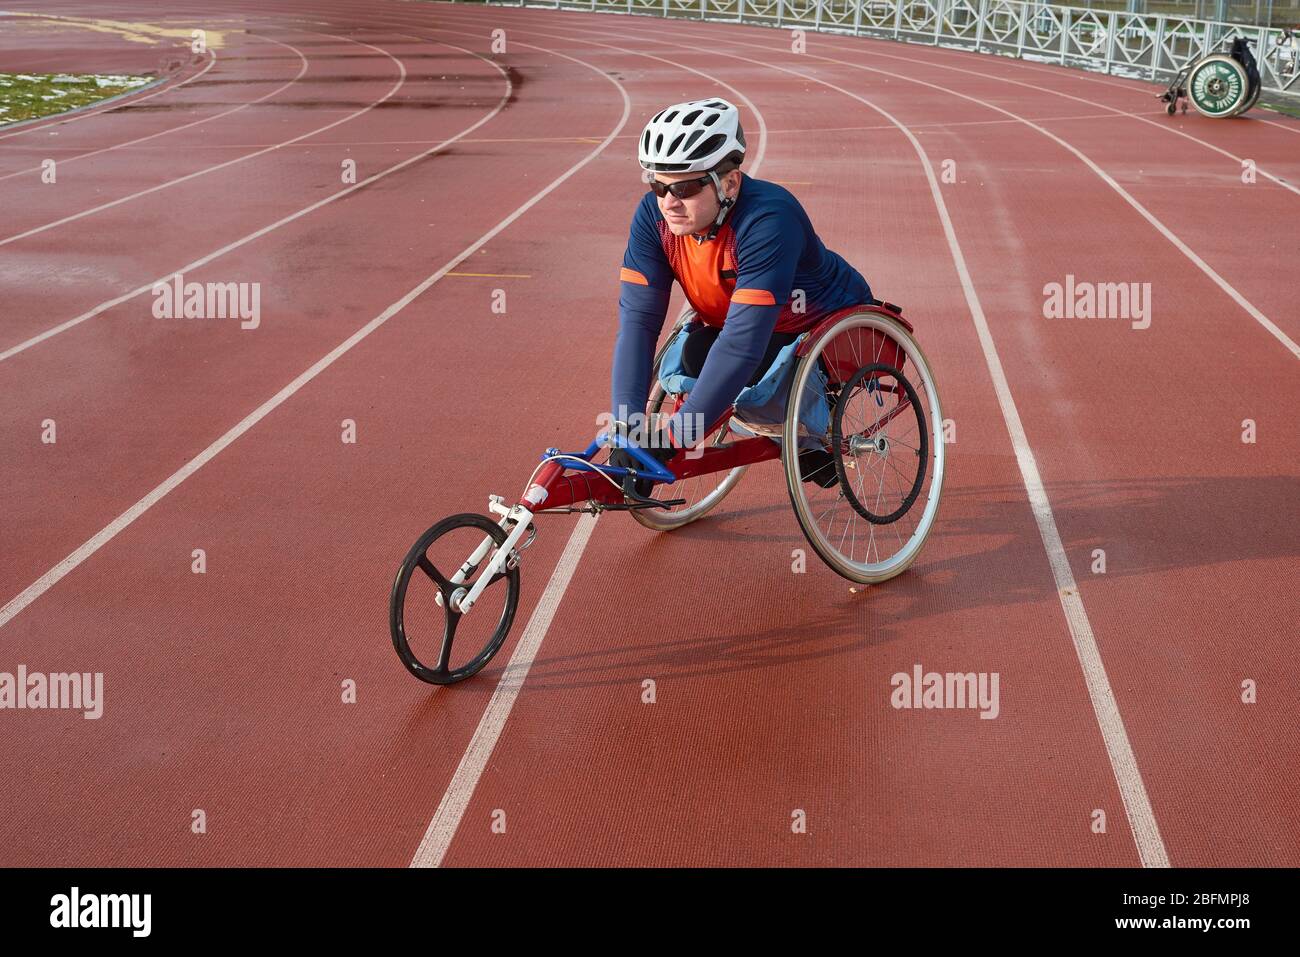 Handicapped sportsman in helmet and sunglasses sitting in racing wheelchair at outdoor track and field stadium and getting ready for marathon Stock Photo